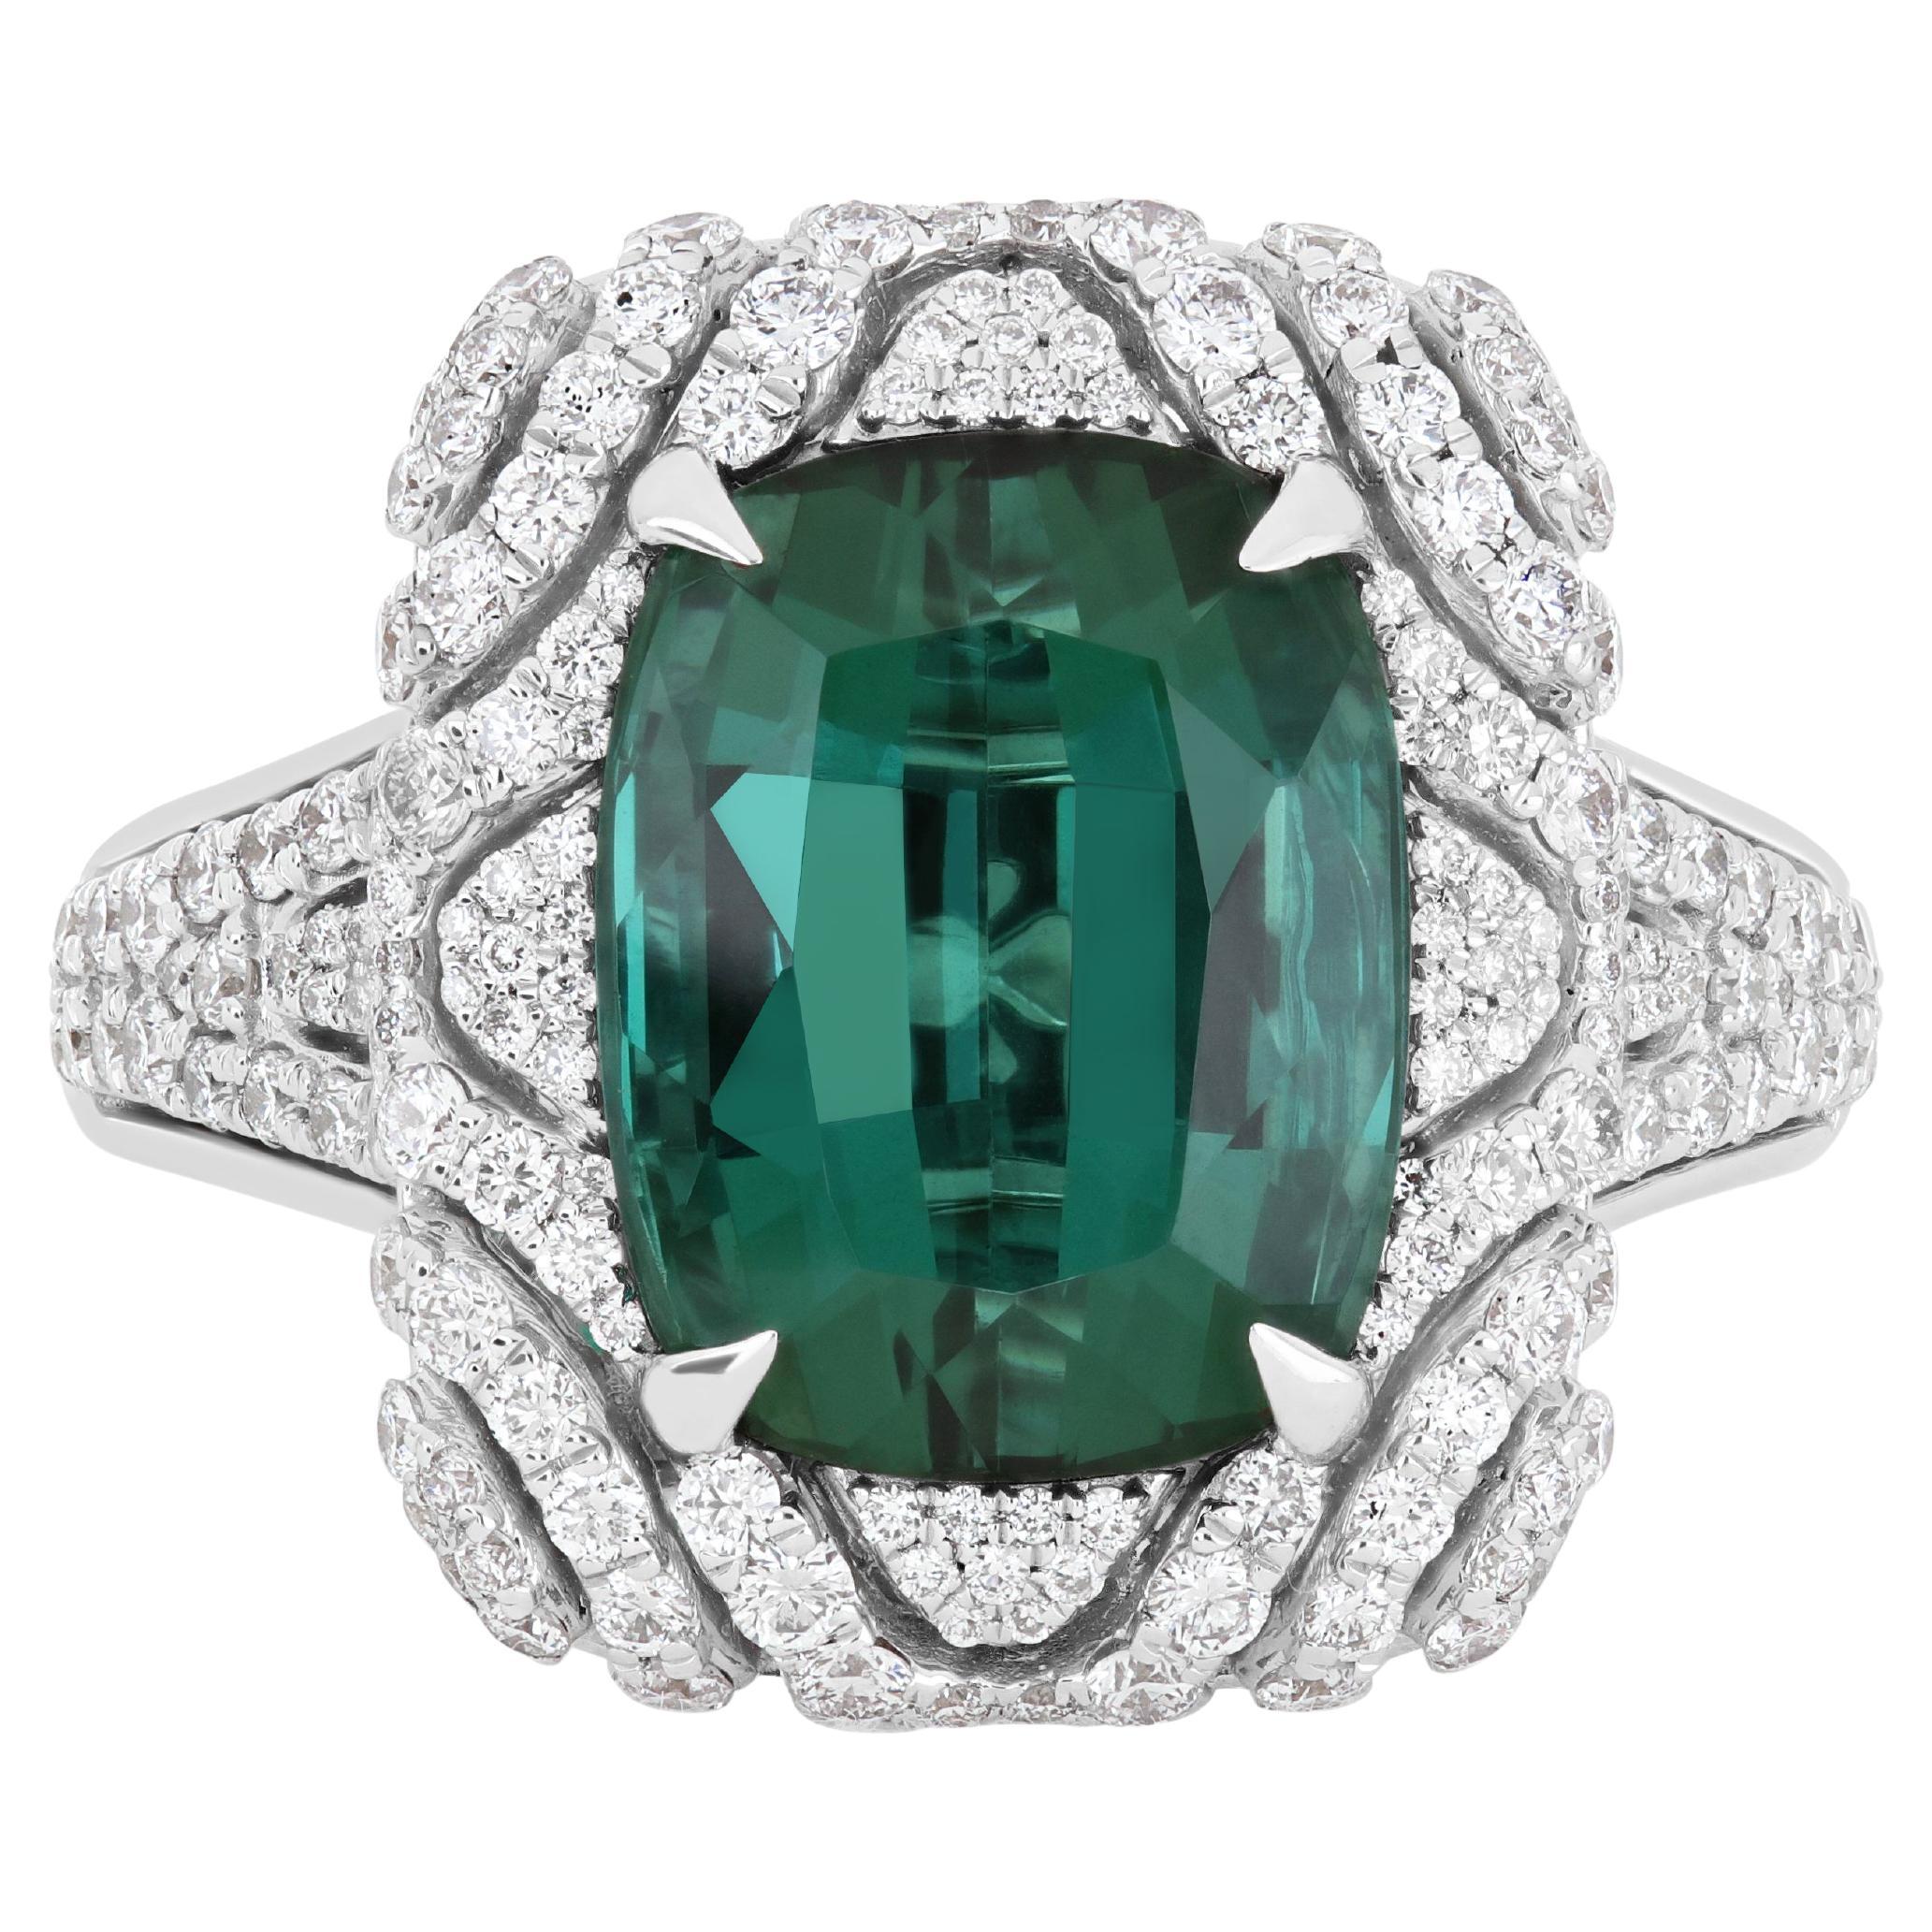 8.7 Carat Green Tourmaline and Diamond Studded Ring in 18K White Gold